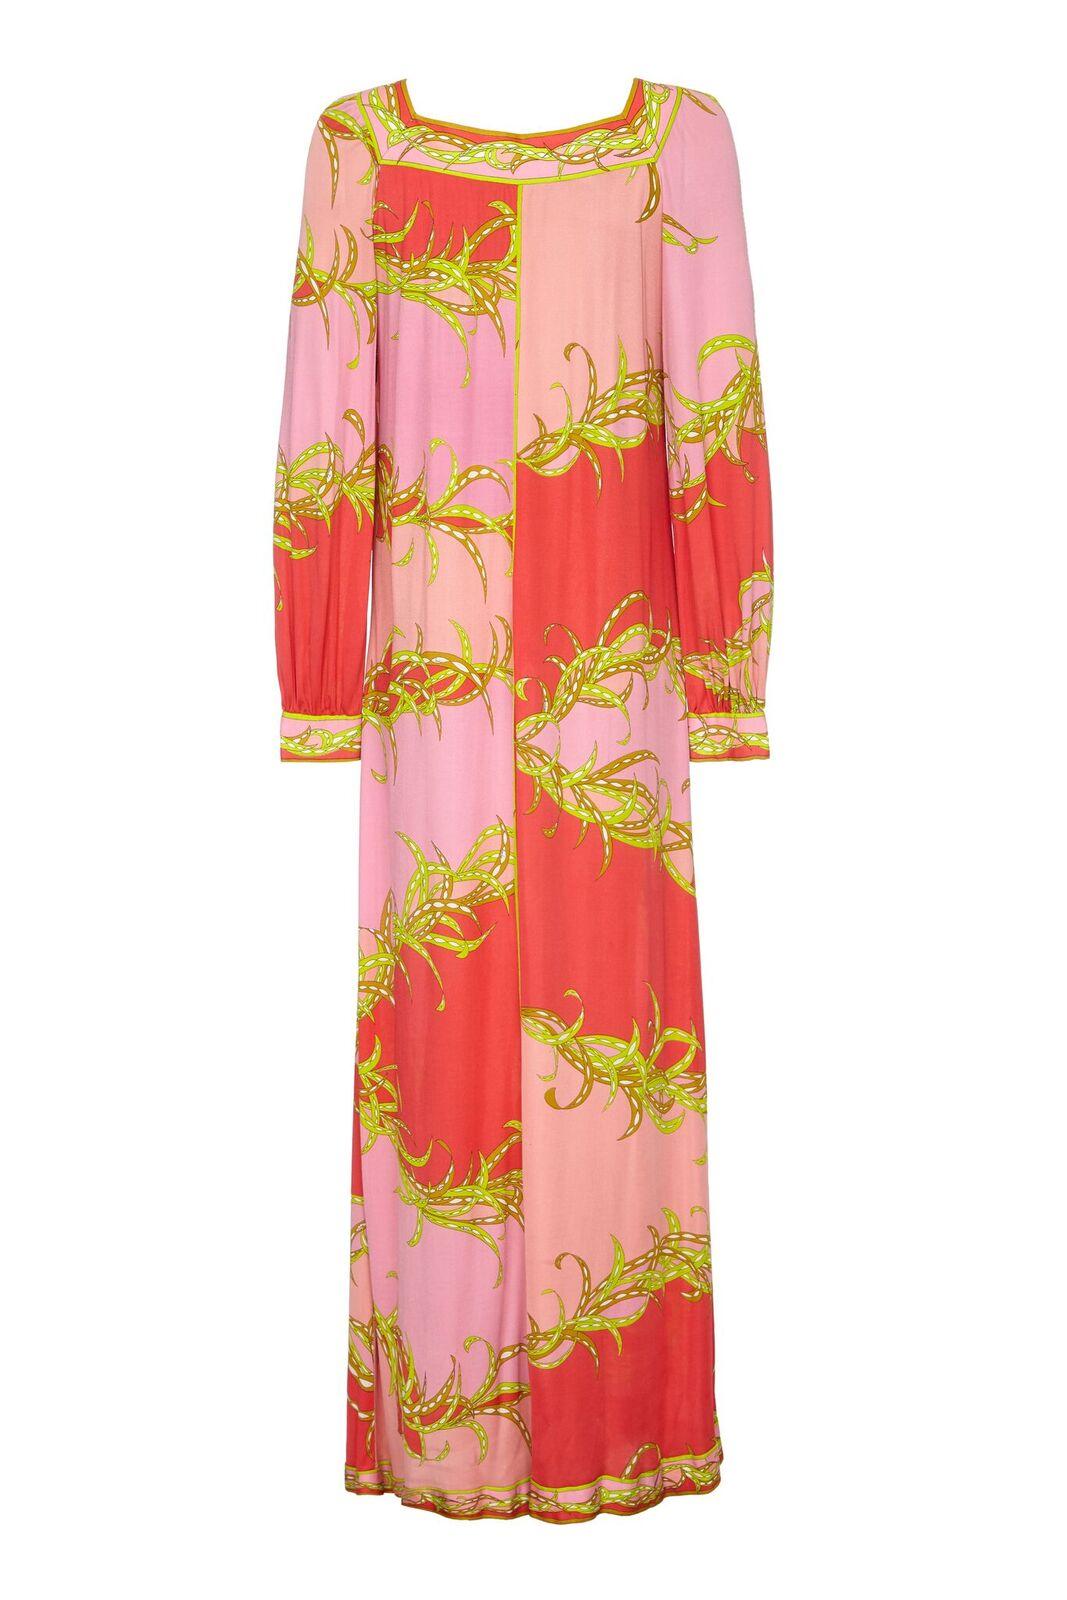 This incredible late 1960s to early 1970s tropical print silk lounge dress by Emilio Pucci is in superb vintage condition and is guaranteed to turn heads in any setting. Gathered slightly beneath a square neckline, the lightweight silk blend fabric